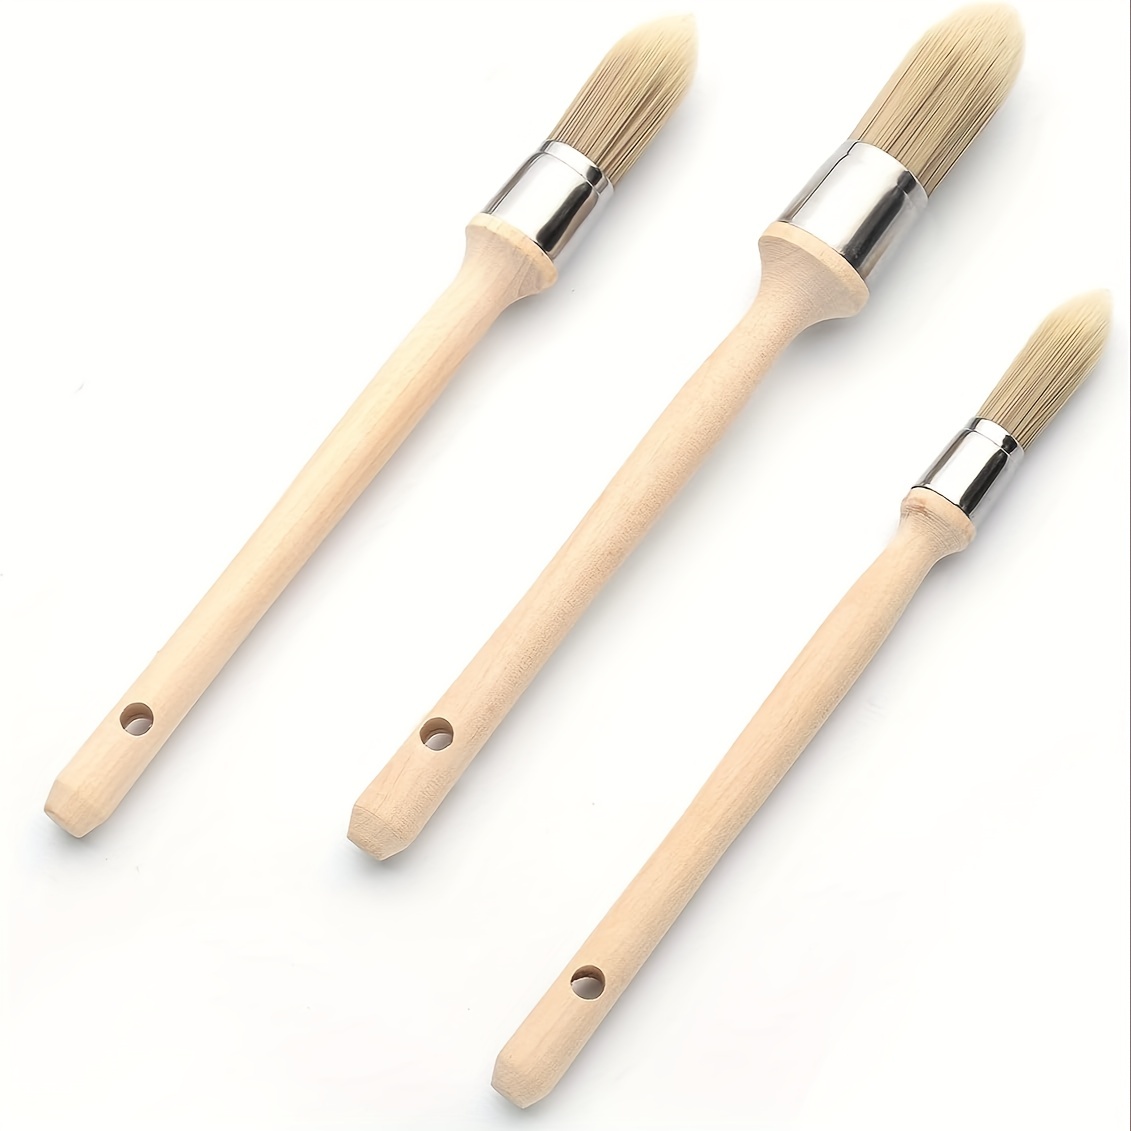 MingQiEven 3 Pcs Trim Brush 0.75 inch Small Paint Brush Round Trim Brush Corner Paint Brush for House Wall Edges Coloring of